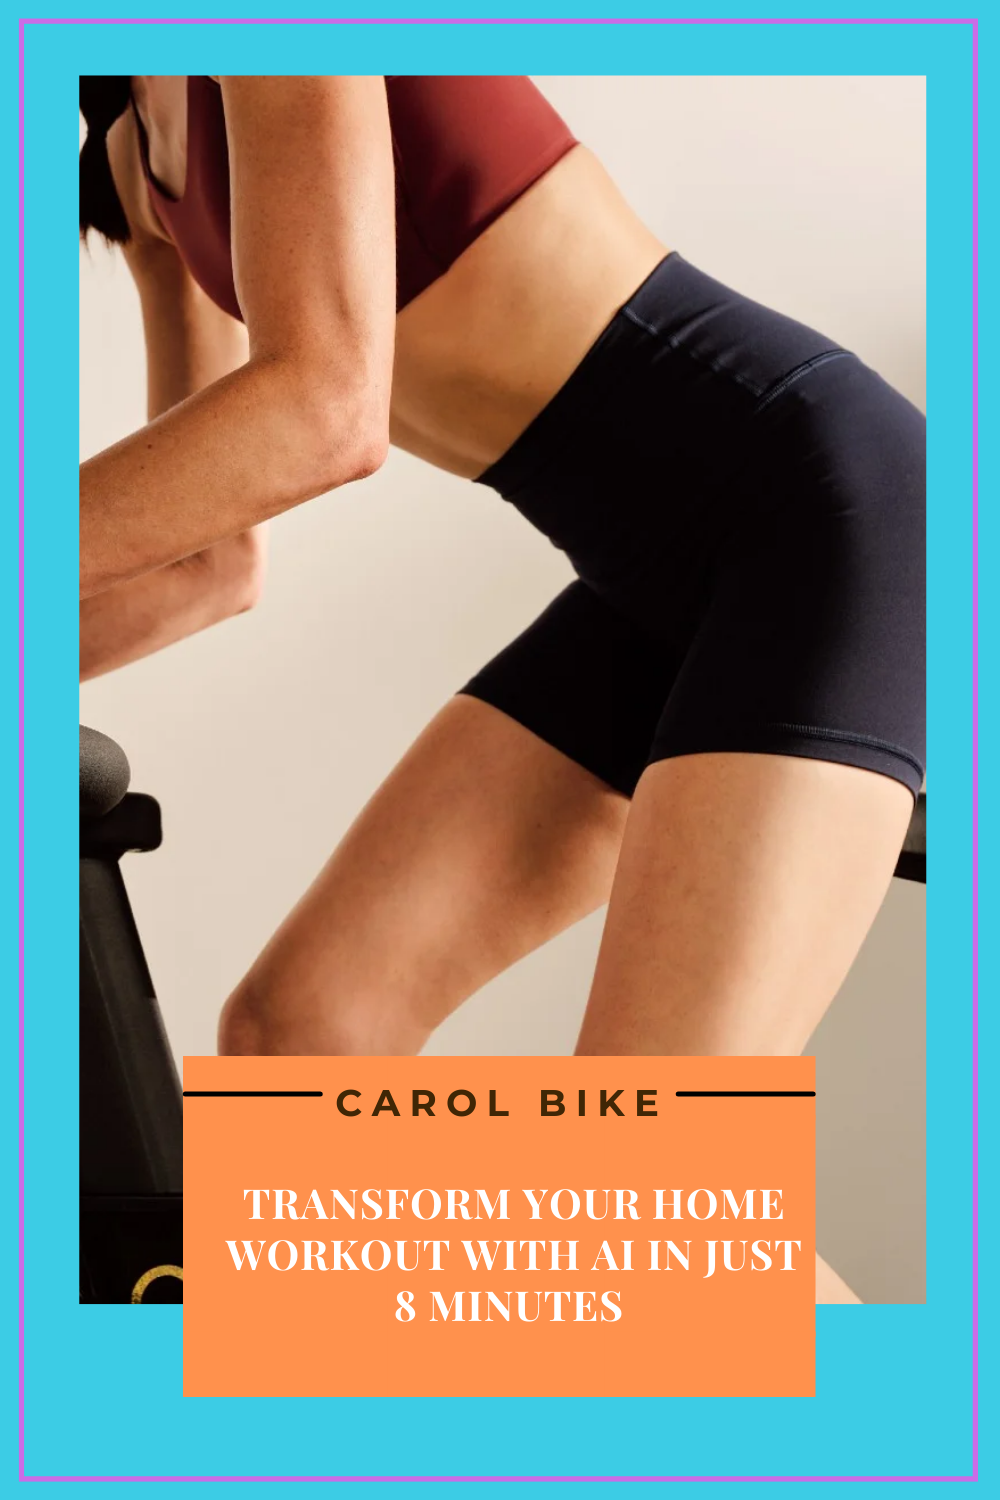 Workout-recommendation-CAROL-Bike-Fat-Burn-rides-burn-twice-as-many-calories-as-moderate-intensity-exercise-Luxe-gifts-ideas-for-her-Luxury-Discount-pinterest-pin